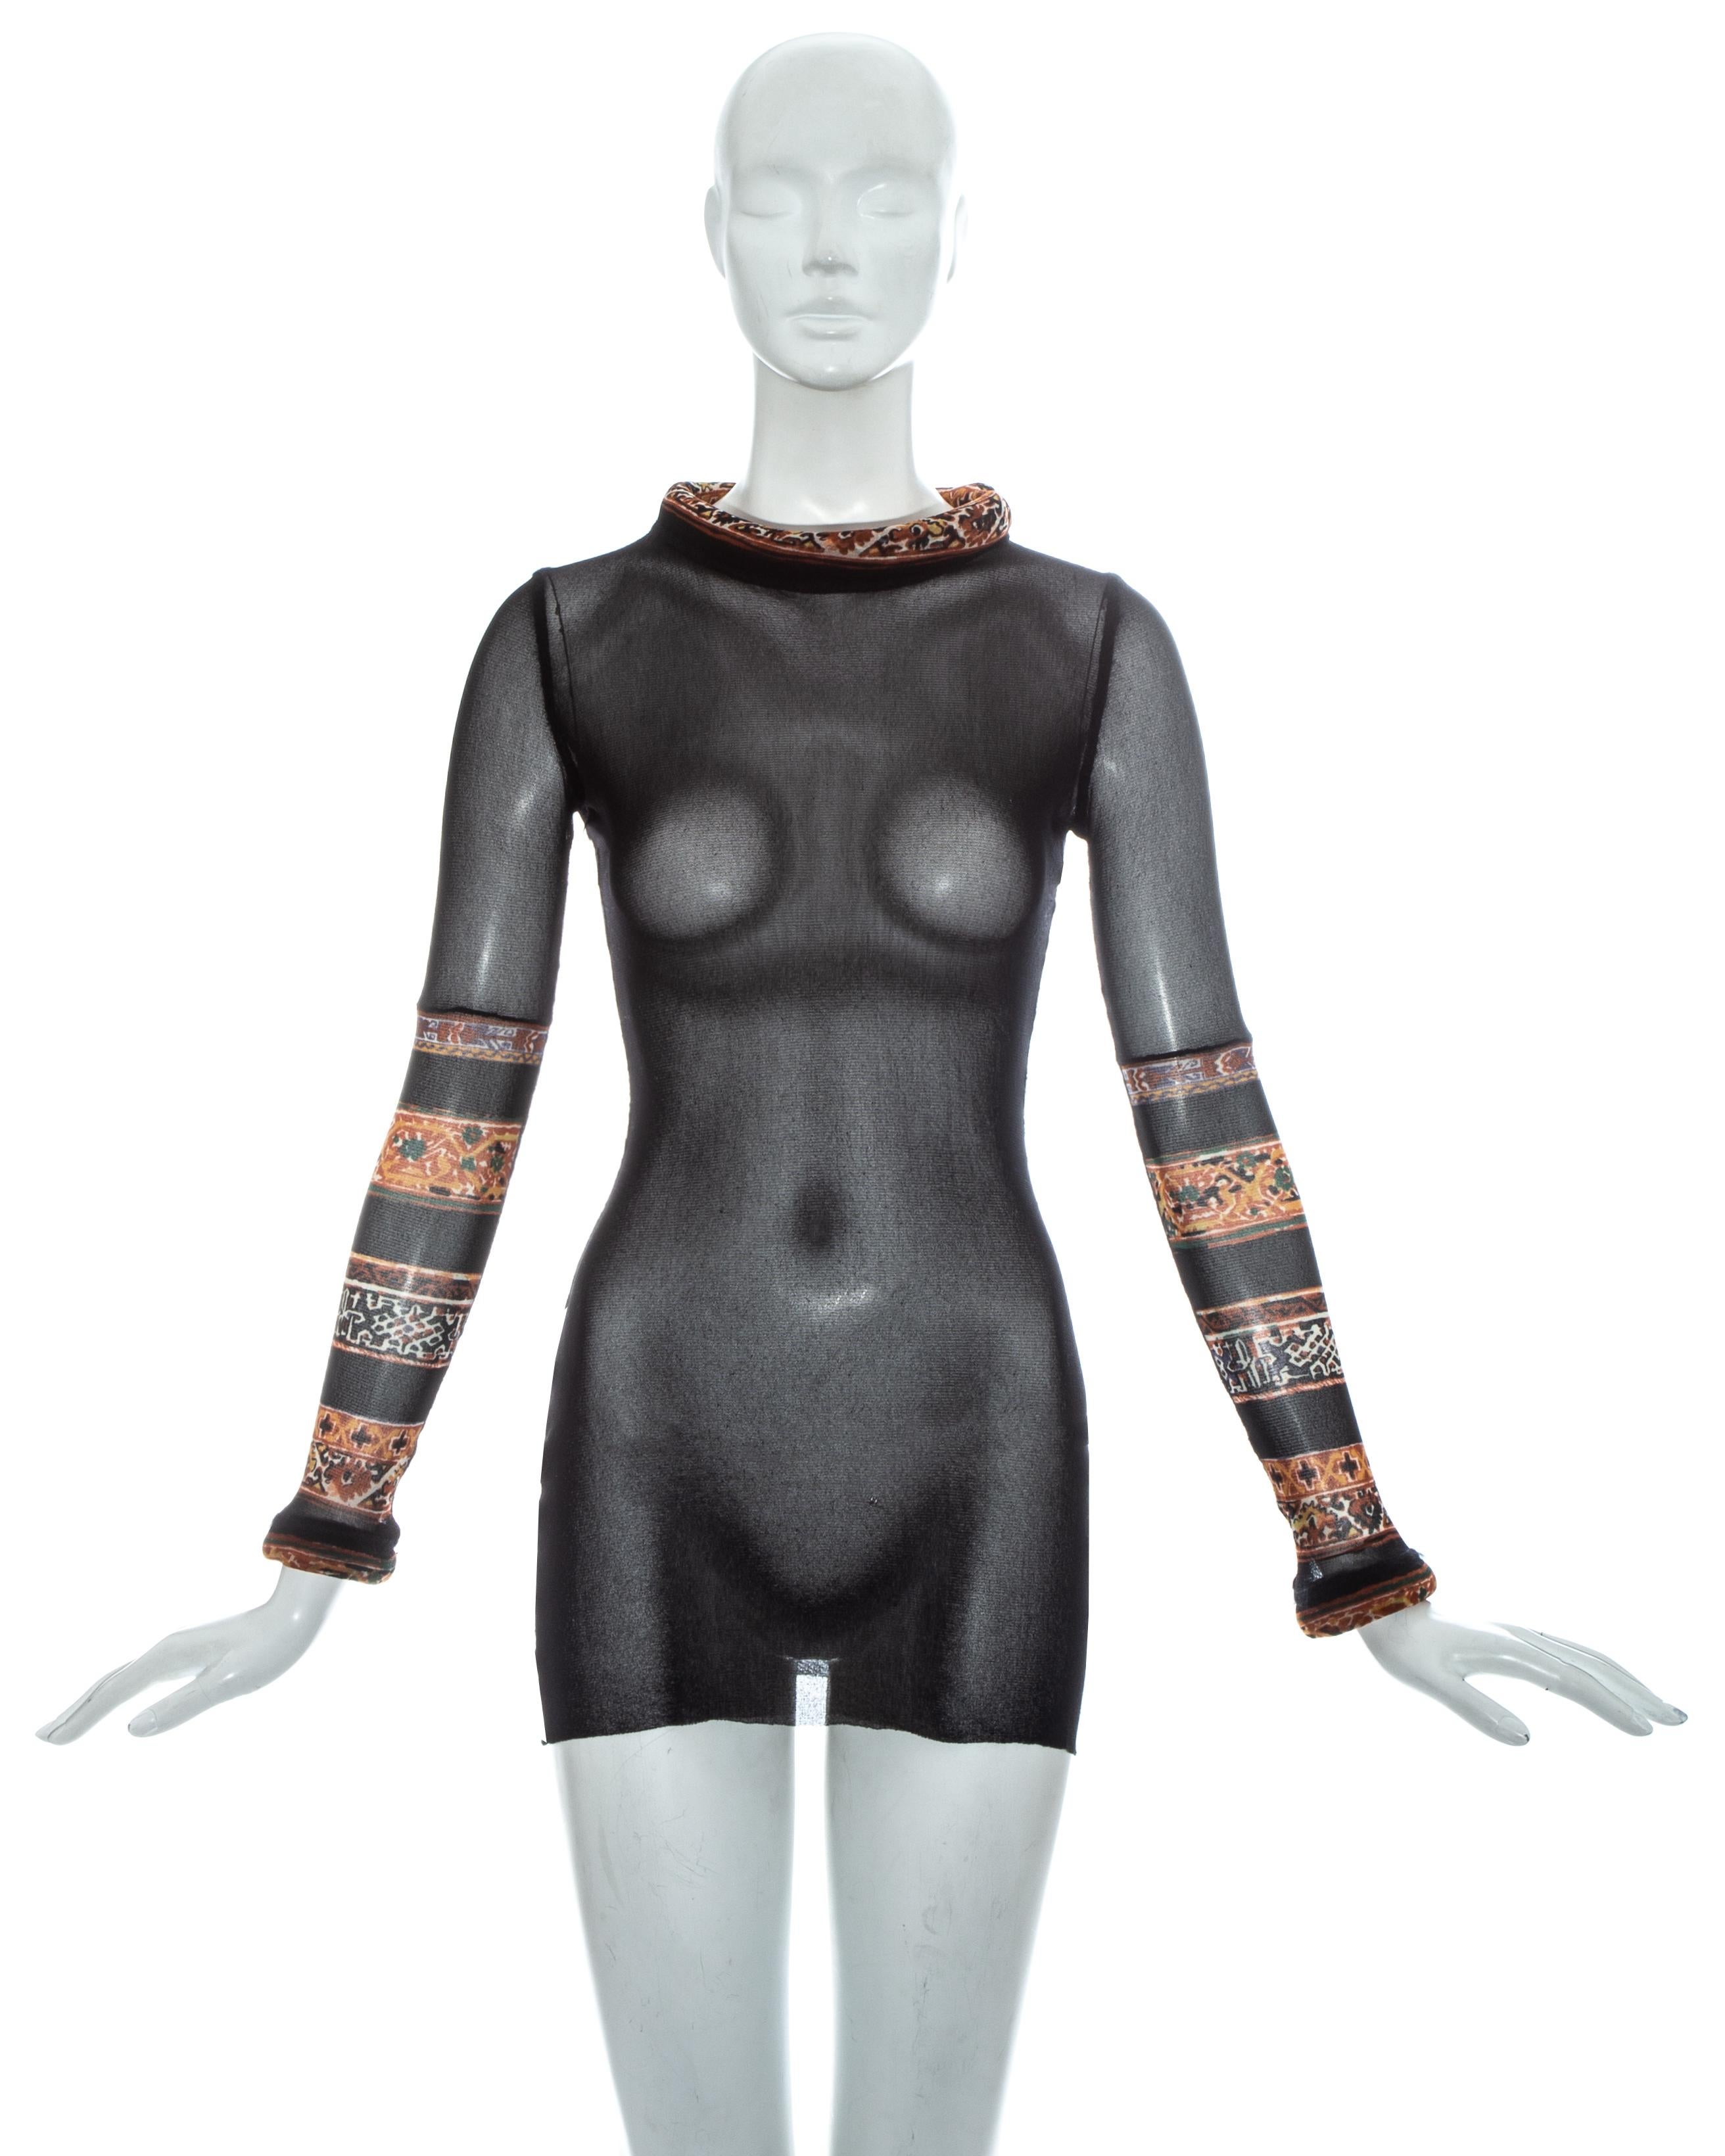 Jean Paul Gaultier black mesh sweater with tubular neck and cuffs.

Fall-Winter 1999